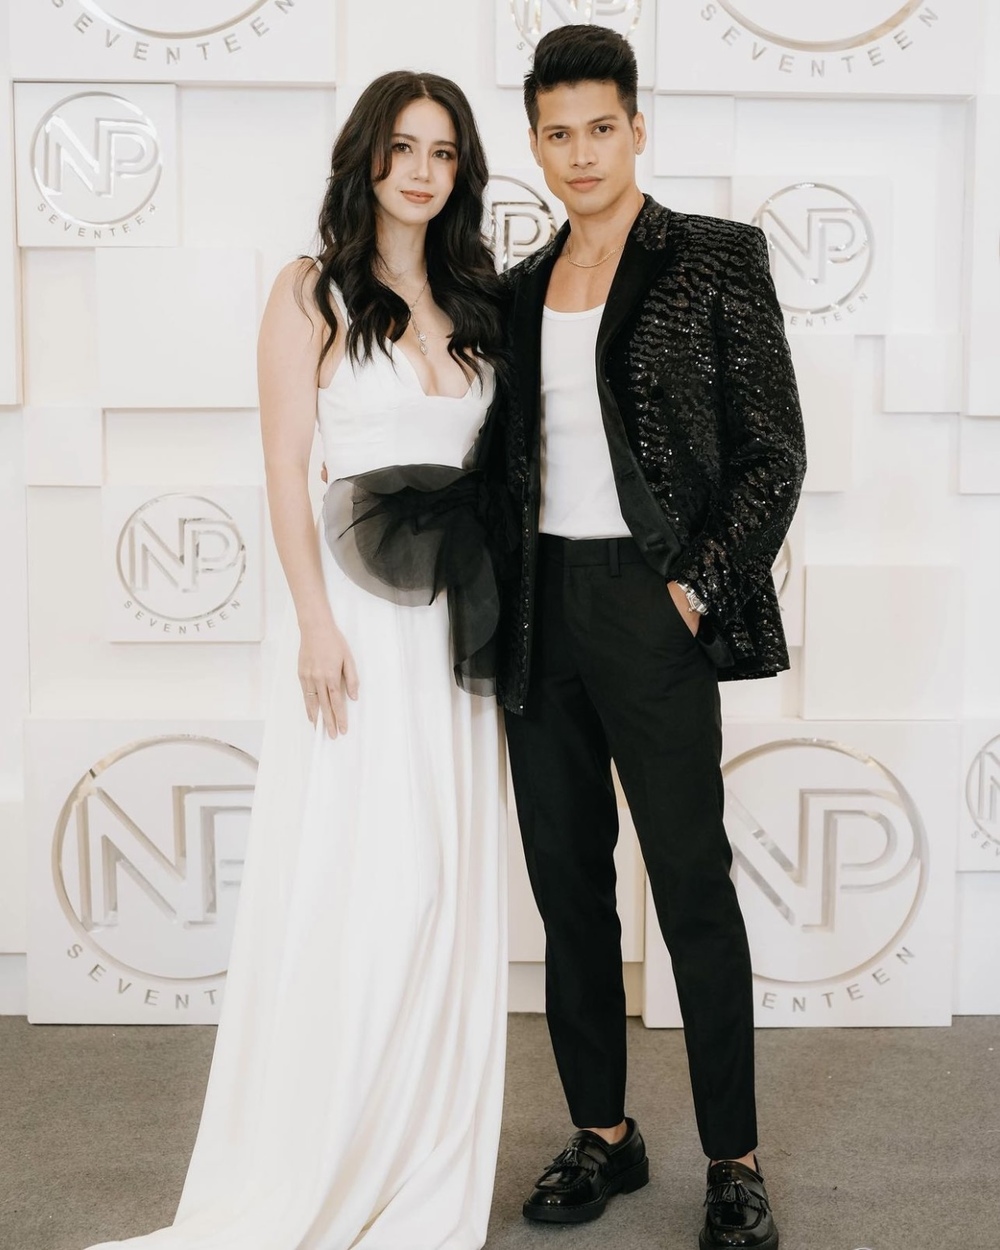 Nice Print Photography anniversary gala guests Sophie Albert and Vin Abrenica